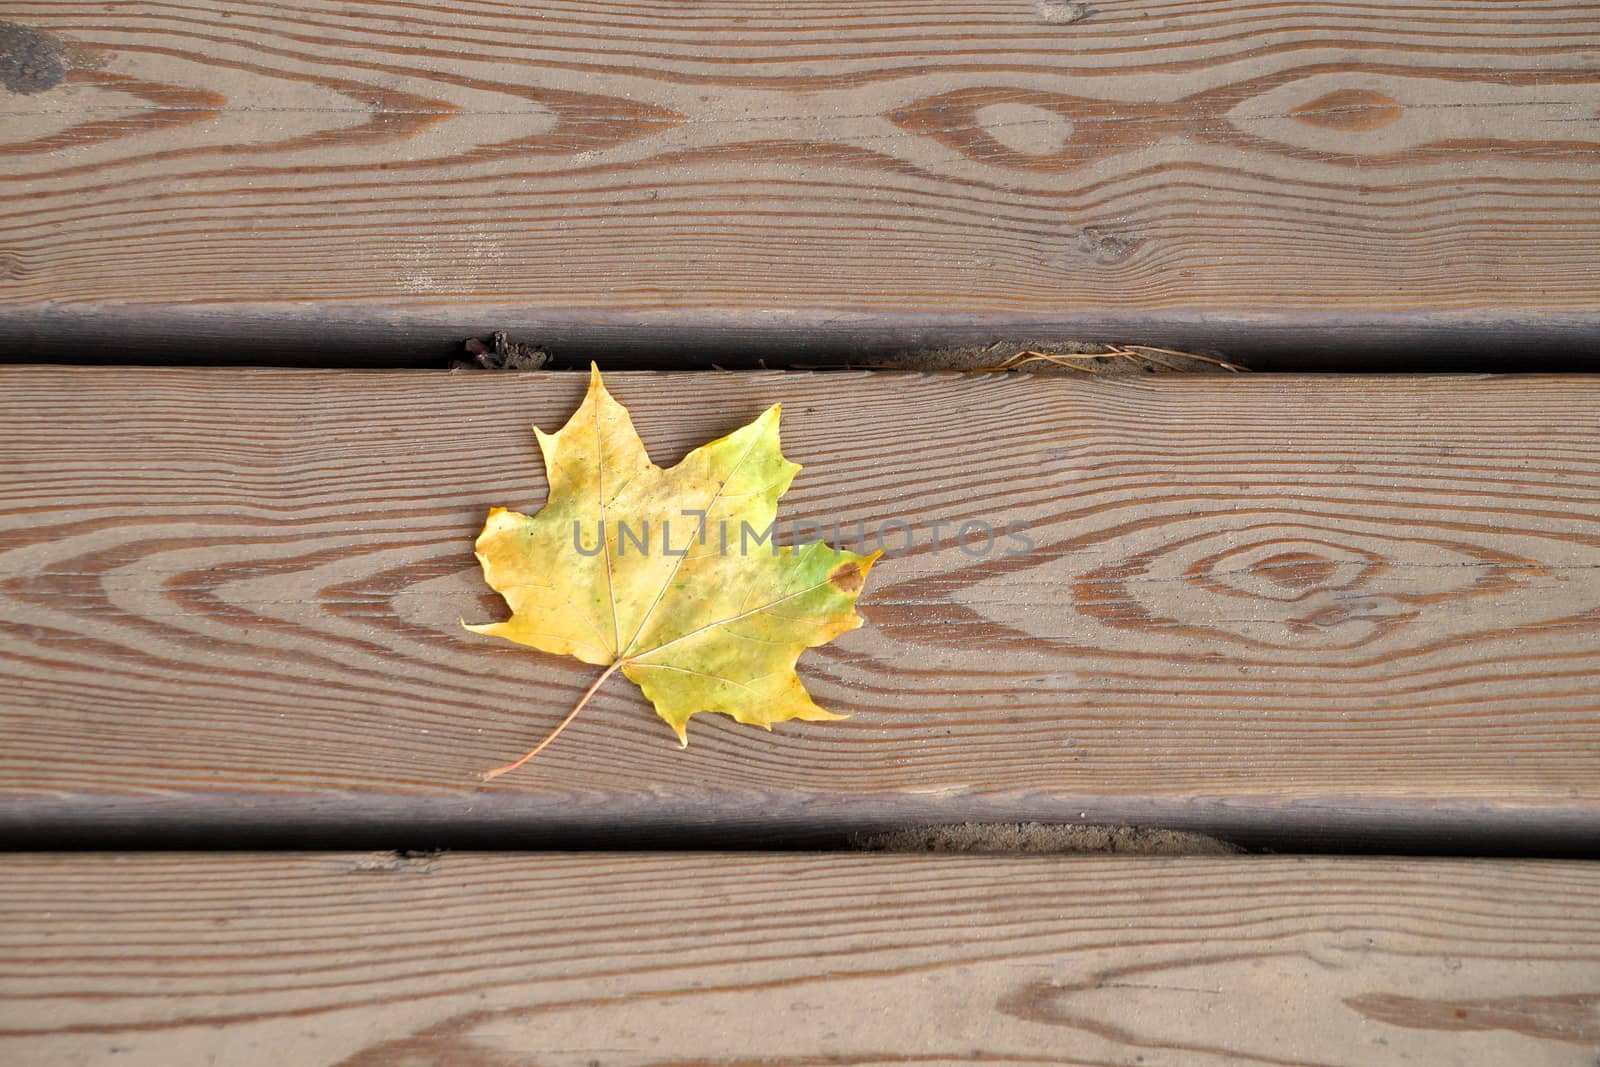 one yellow maple leaf on wooden planks close-up